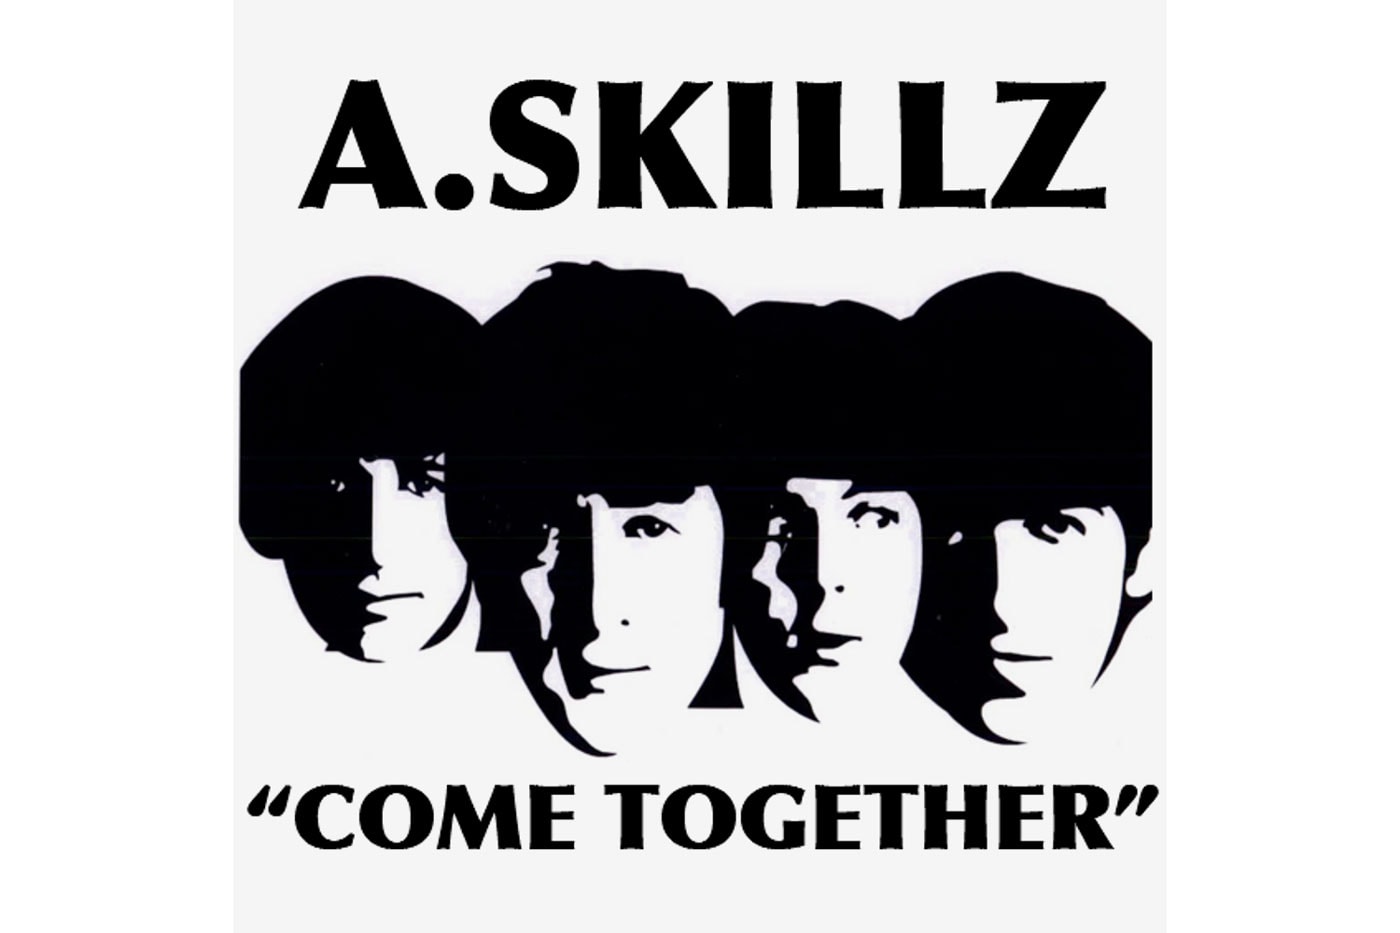 The Beatles - Come Together (A.Skillz Remix)